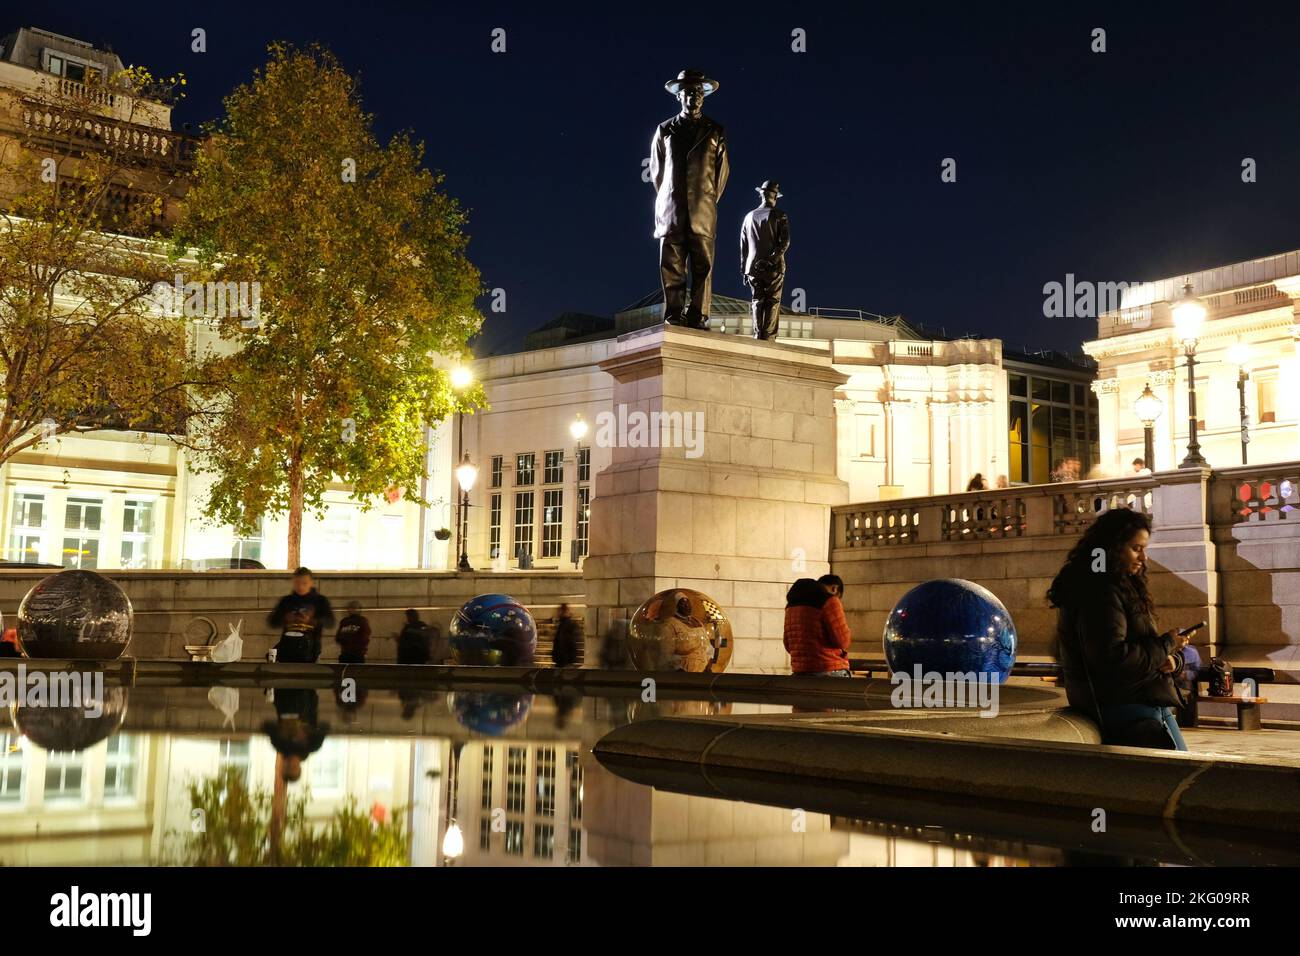 London, UK. 20th November, 2022. The 'World Reimagined' brings together 96 globes painted by African diaspora artists to Trafalgar Square.  The project explores the history and impact of the transatlantic slave trade. Credit: Eleventh Hour Photography/Alamy Live News Stock Photo